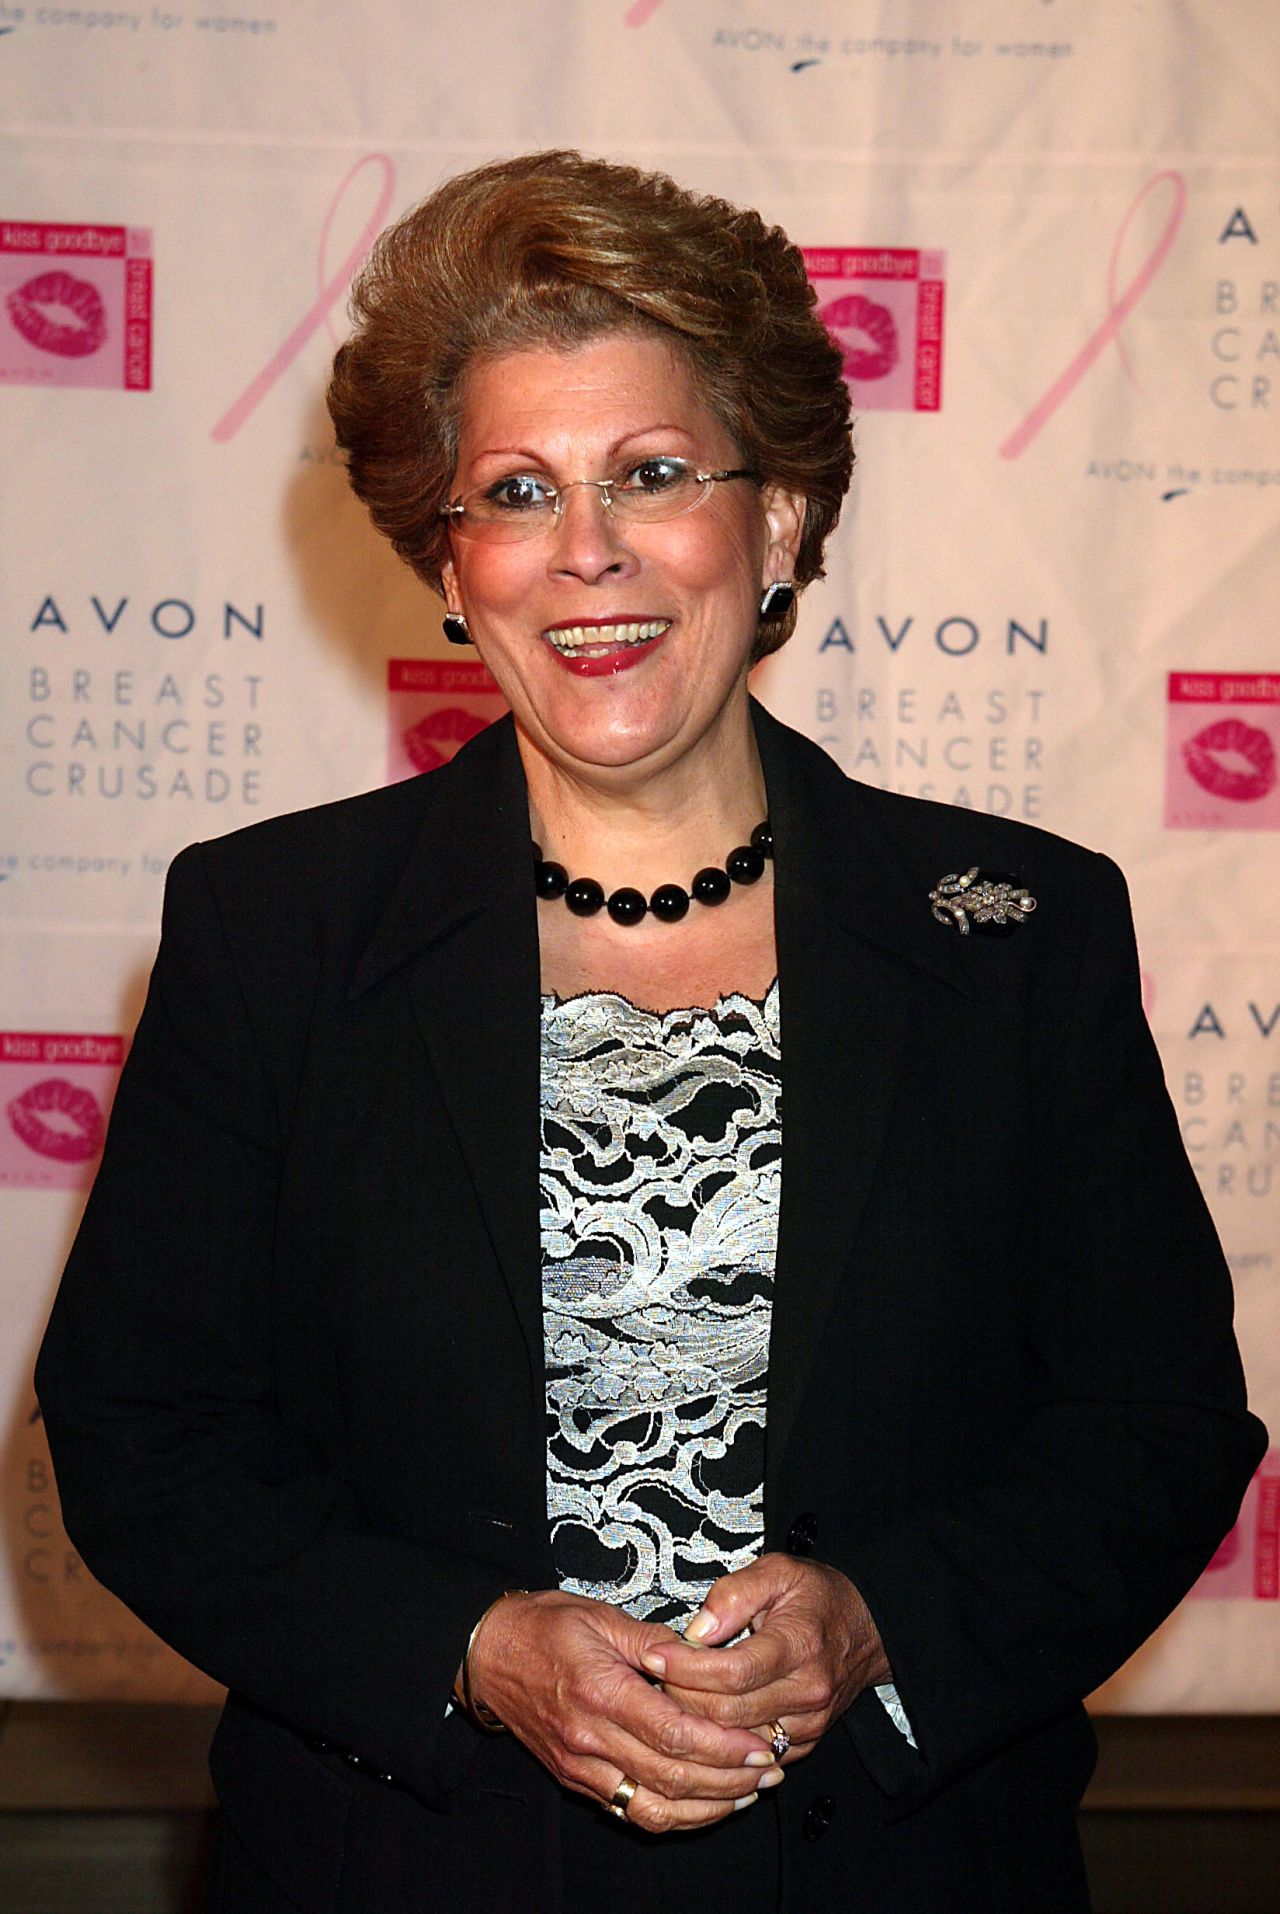 <a href="http://www.surgeongeneral.gov/about/previous/bionovello.html" target="_blank" target="_blank">Antonia Novello</a> was the first female surgeon general of the United States, as well as the first of Hispanic origin. During her time in office, she helped launch the <a href="http://www.ncbi.nlm.nih.gov/pmc/articles/PMC1403595/" target="_blank" target="_blank">Healthy Children Ready to Learn Initiative</a> and spoke out against underage drinking.